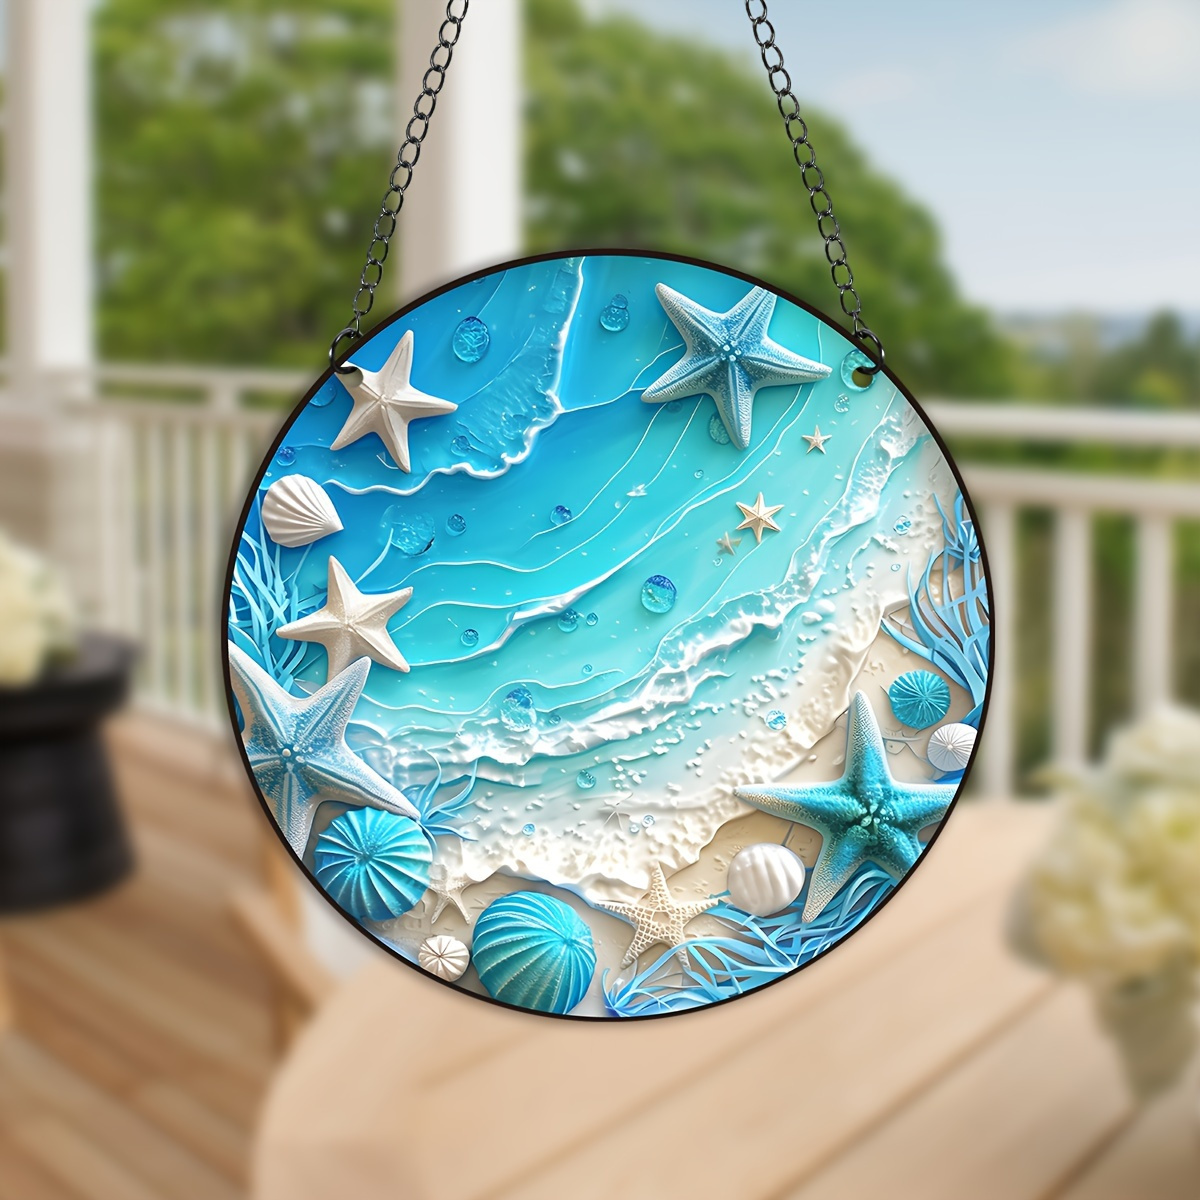 

Acrylic Wave & Seafood Hanging Suncatcher - Universal Holiday Decor, Stained Window Pendant With Starfish & Seashells, Round Wreath Sign, Porch & Wall Decoration, No Electricity Needed, 5.9in/15cm